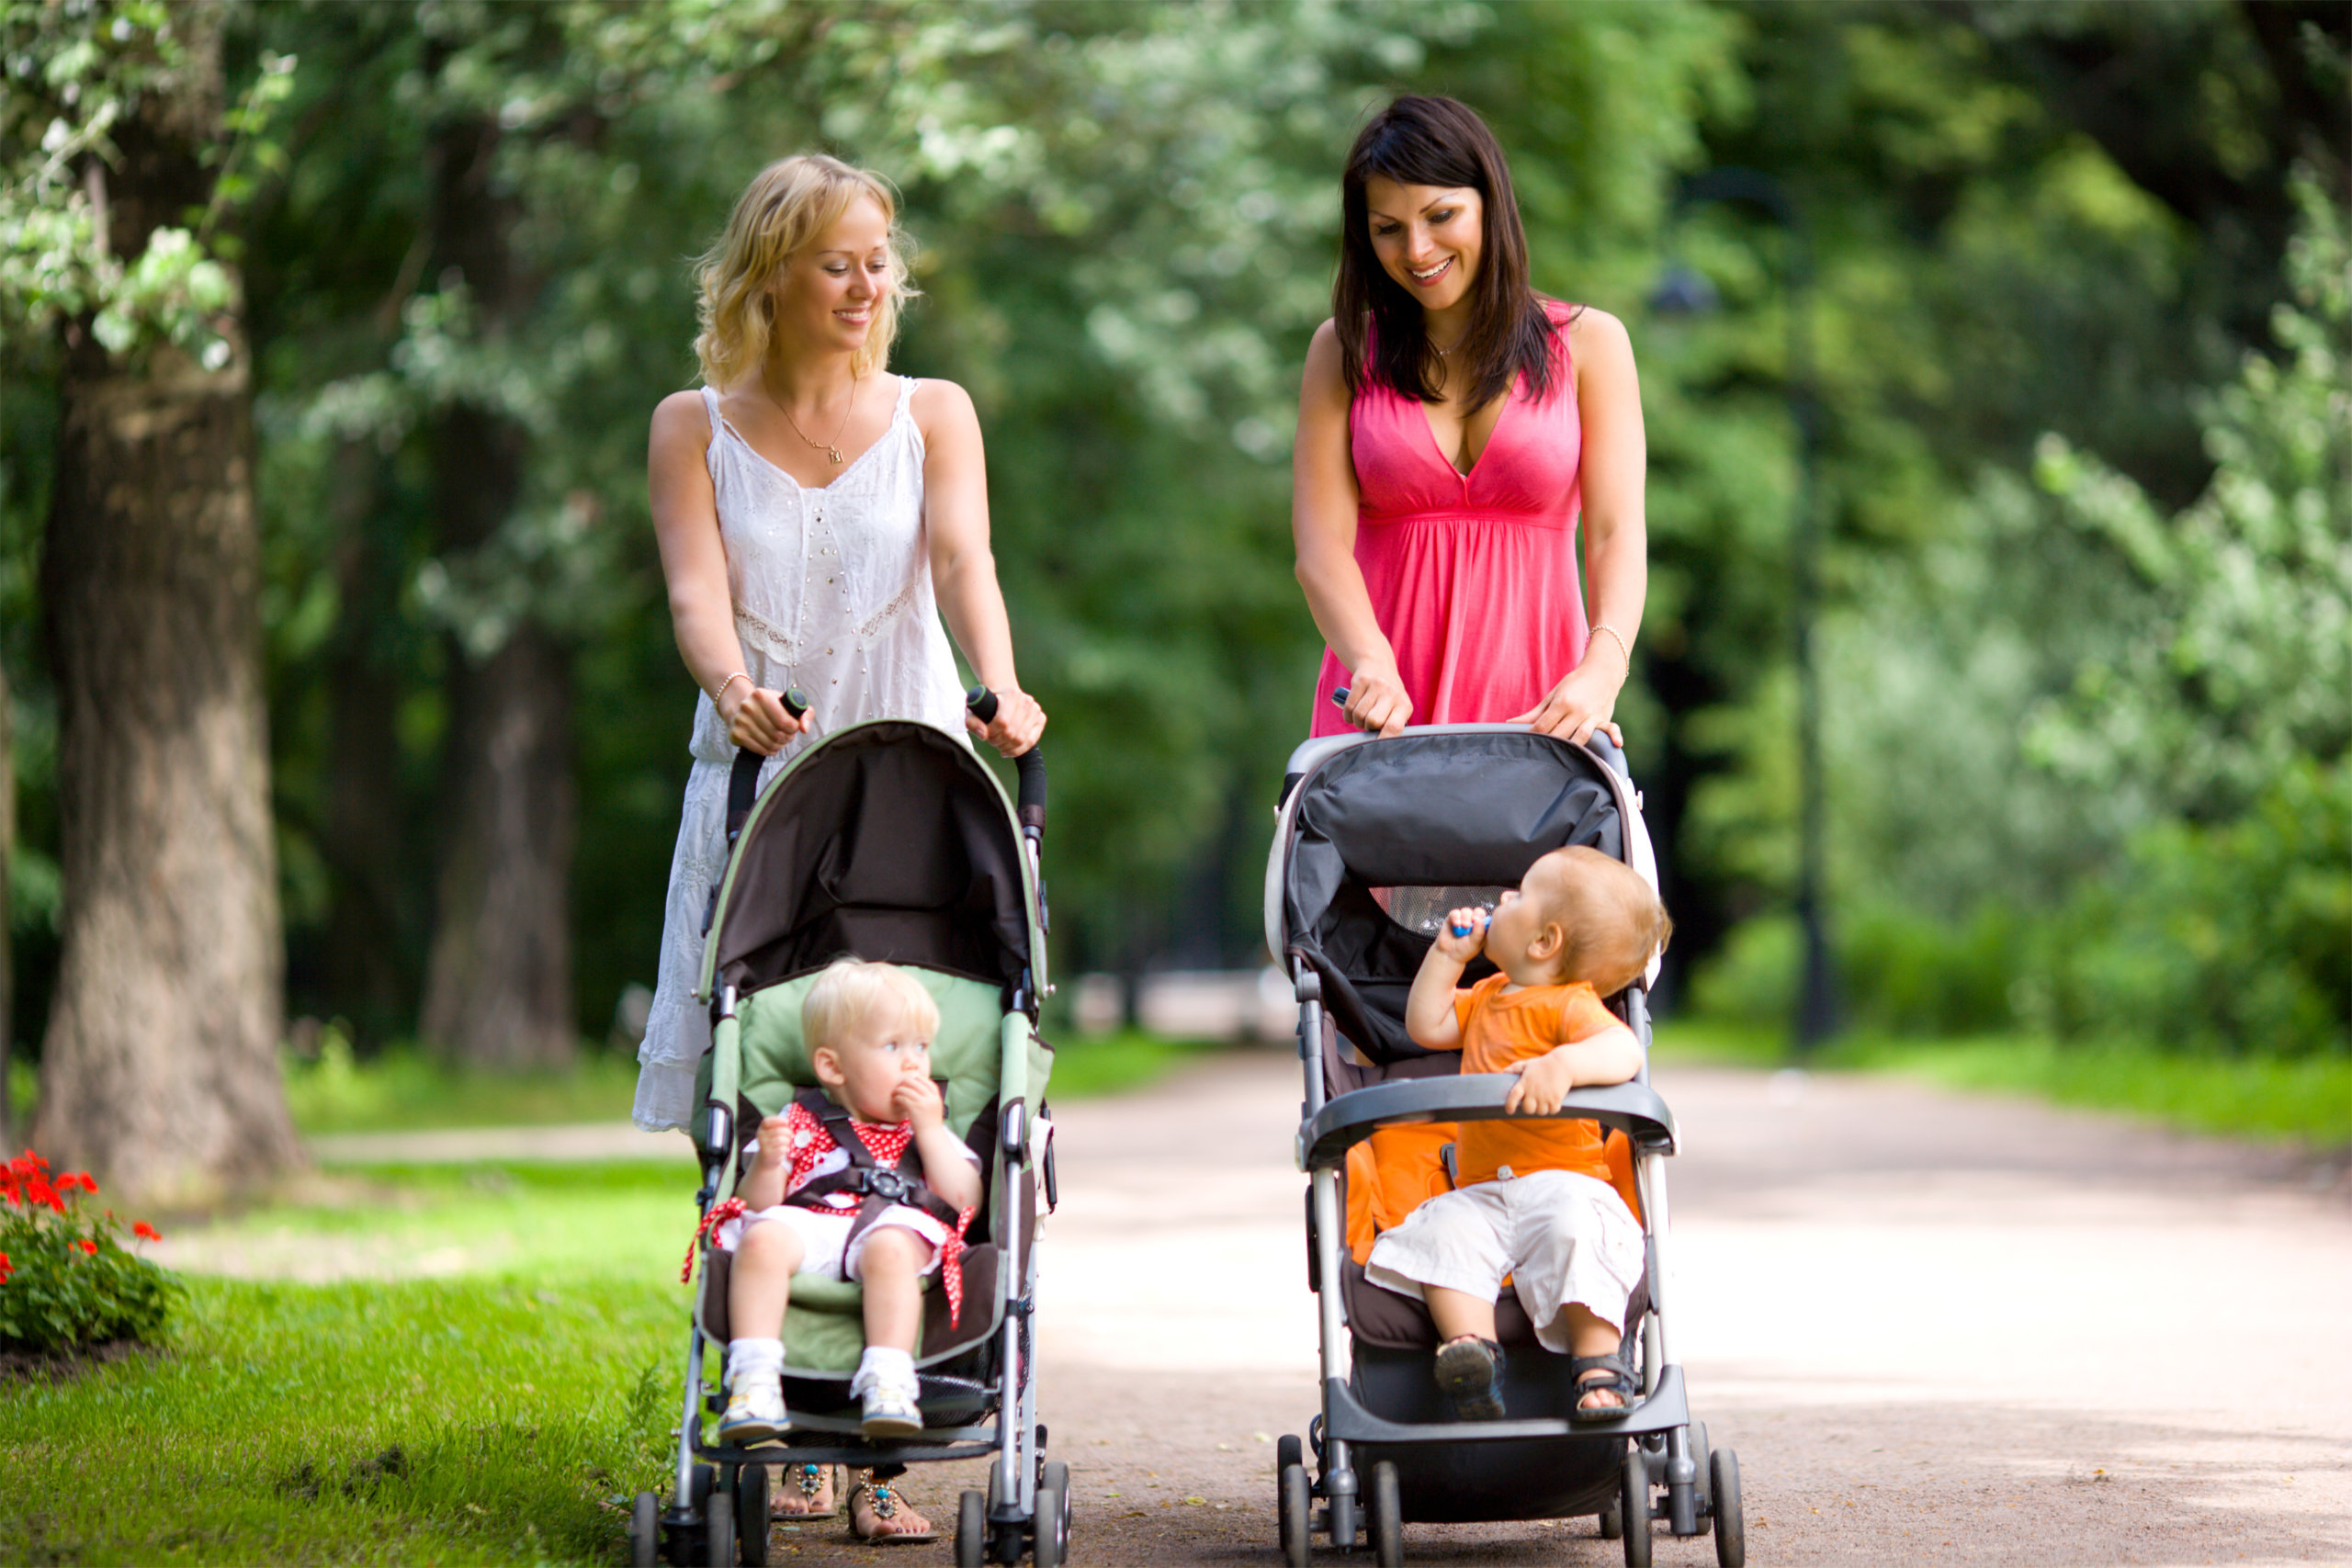 Tired of stroll(er)ing through the park alone? Share the experience with other local moms.